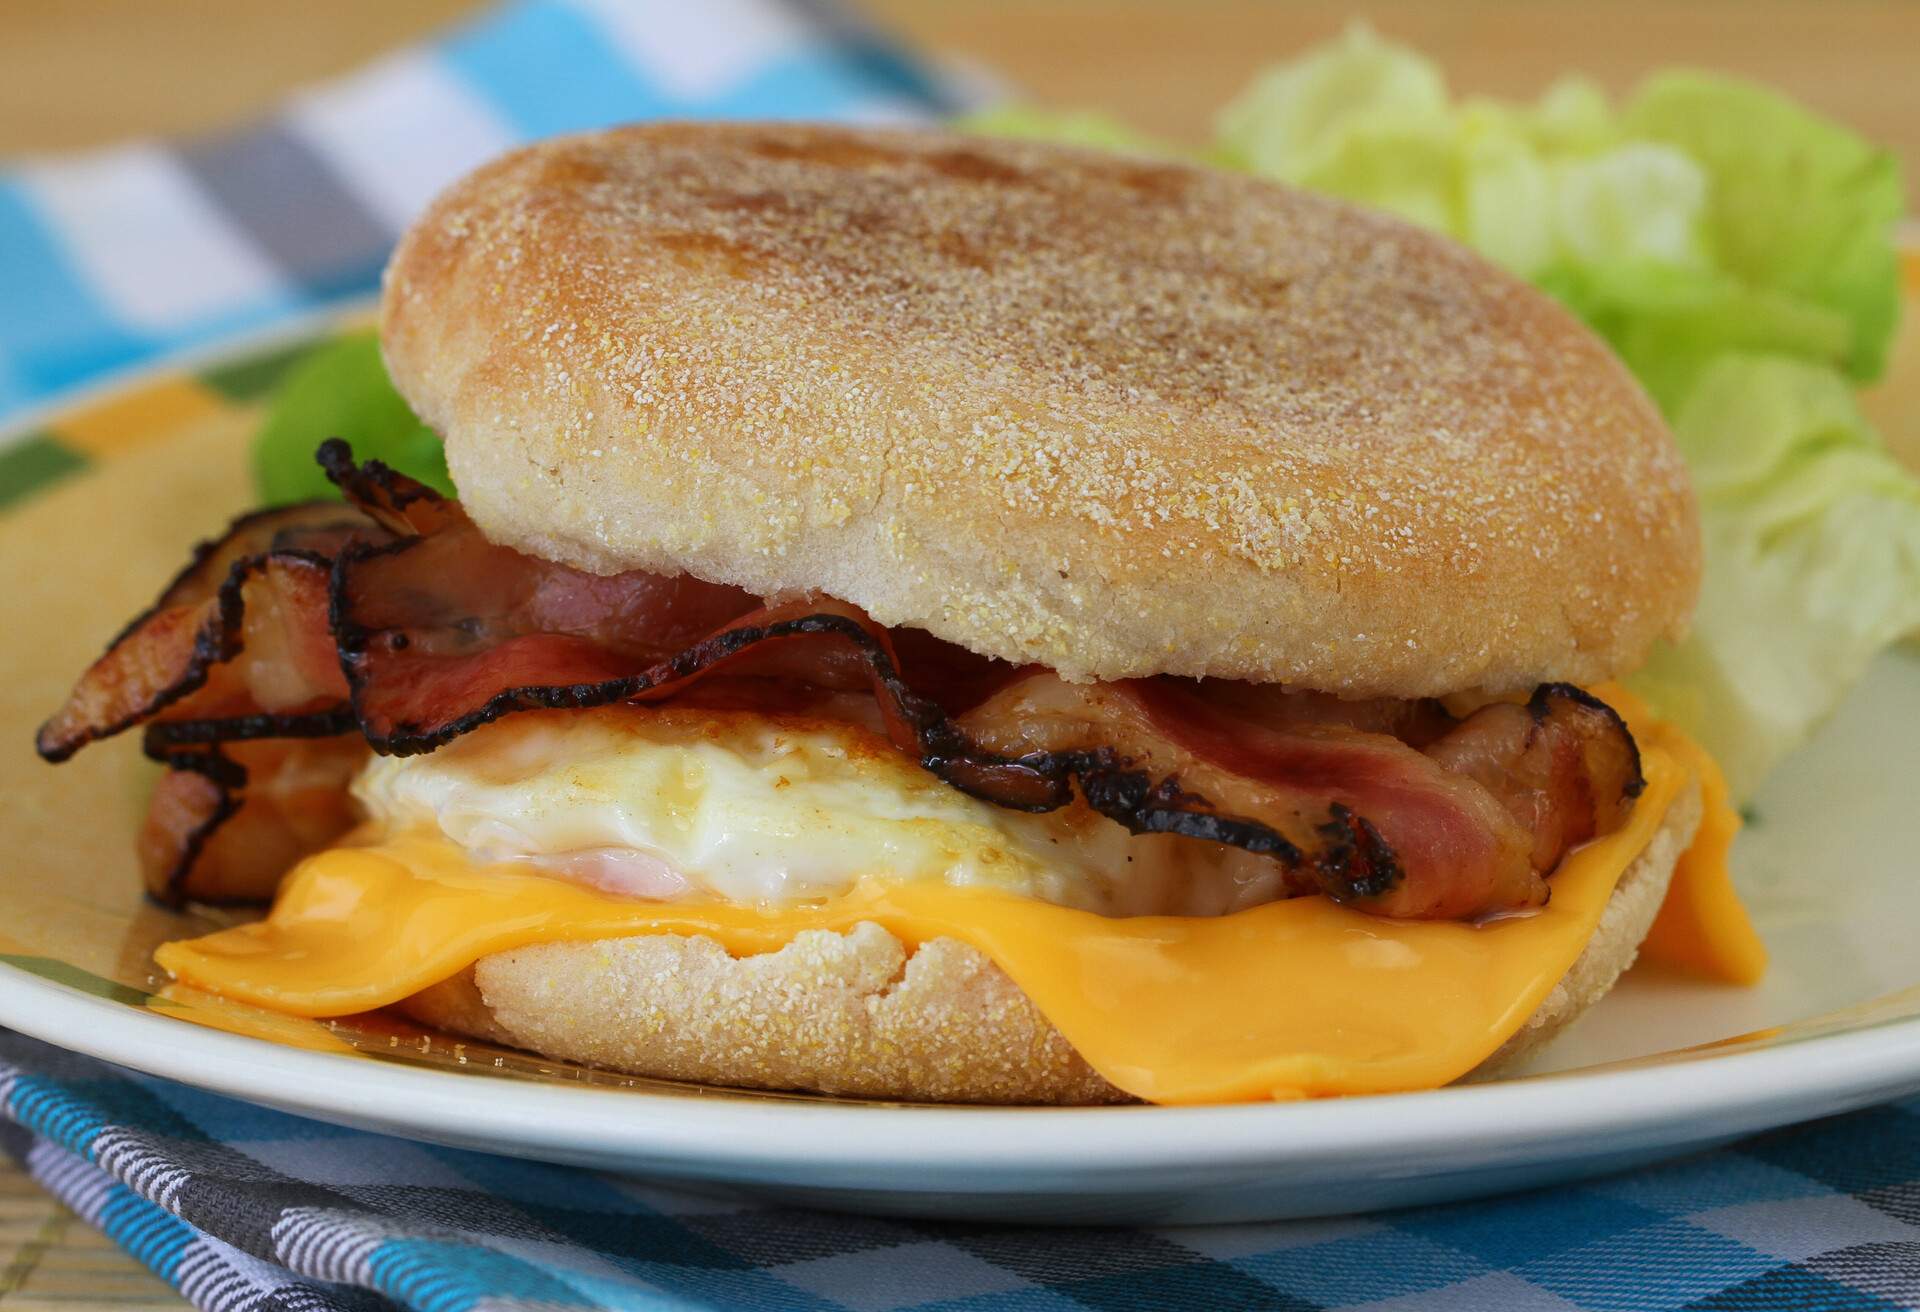 English muffin with fried egg, bacon and cheese